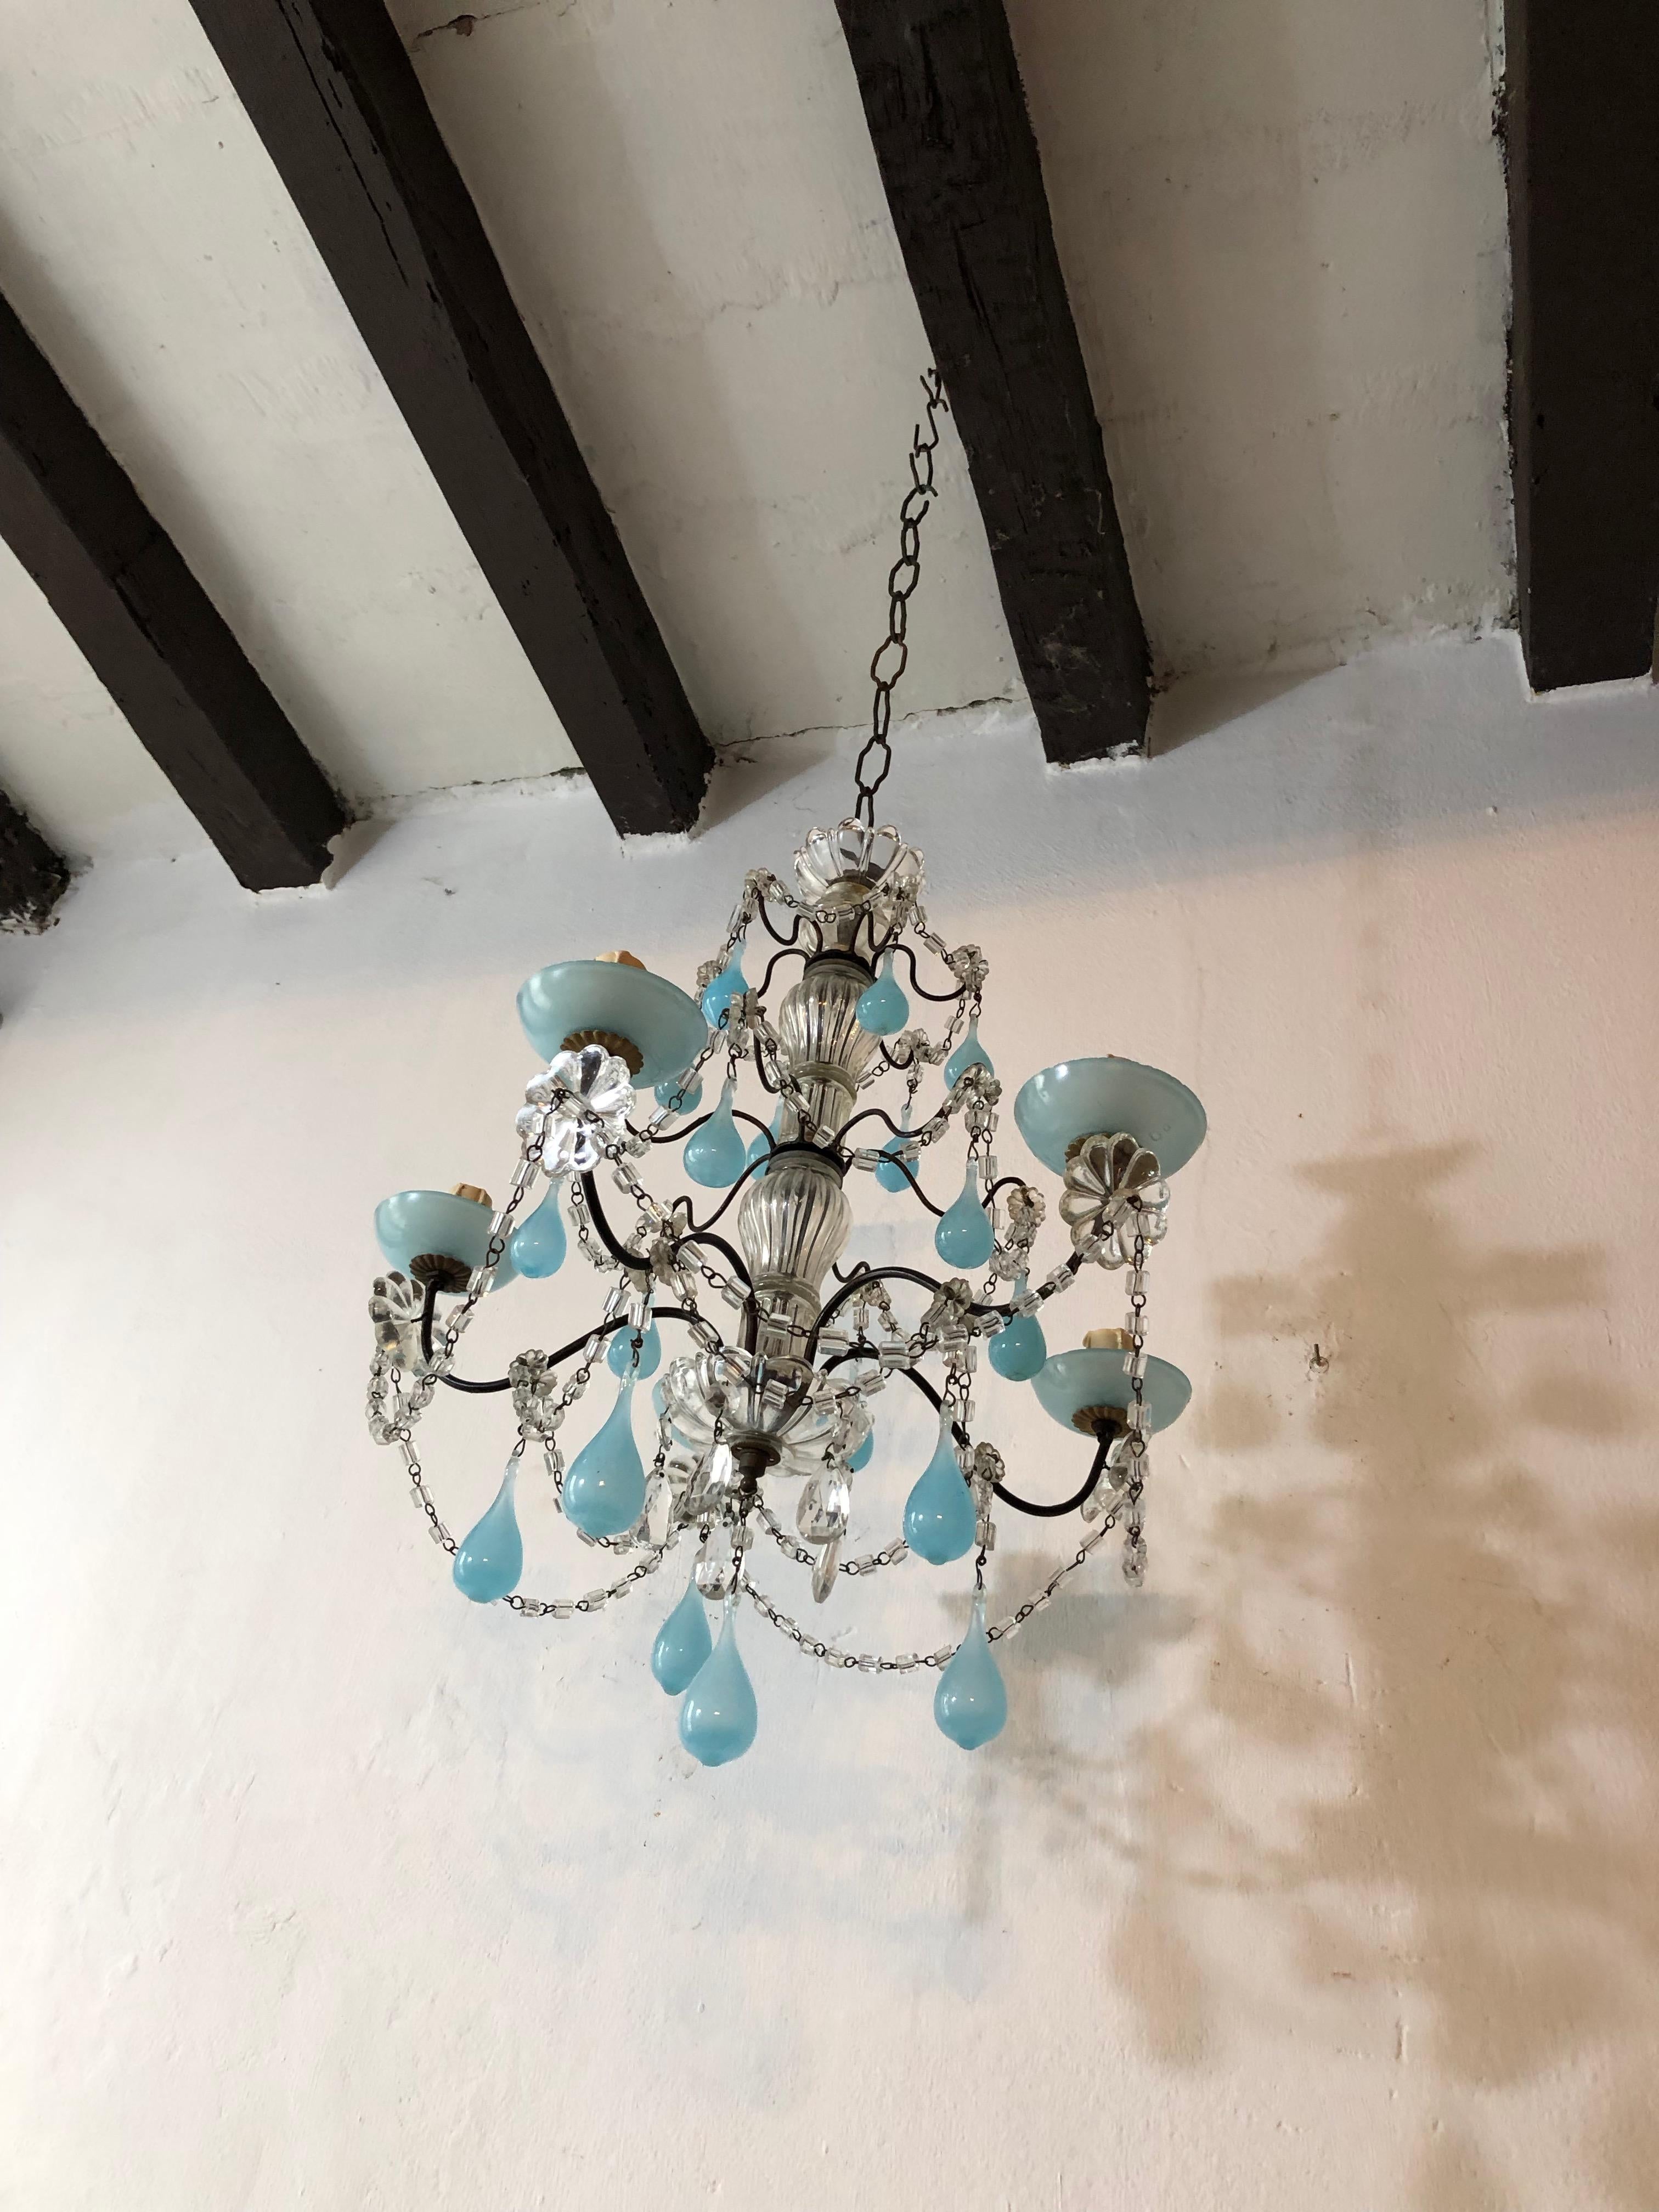 French Aqua Blue Opaline Murano Drops and Bobeches Chandelier 2